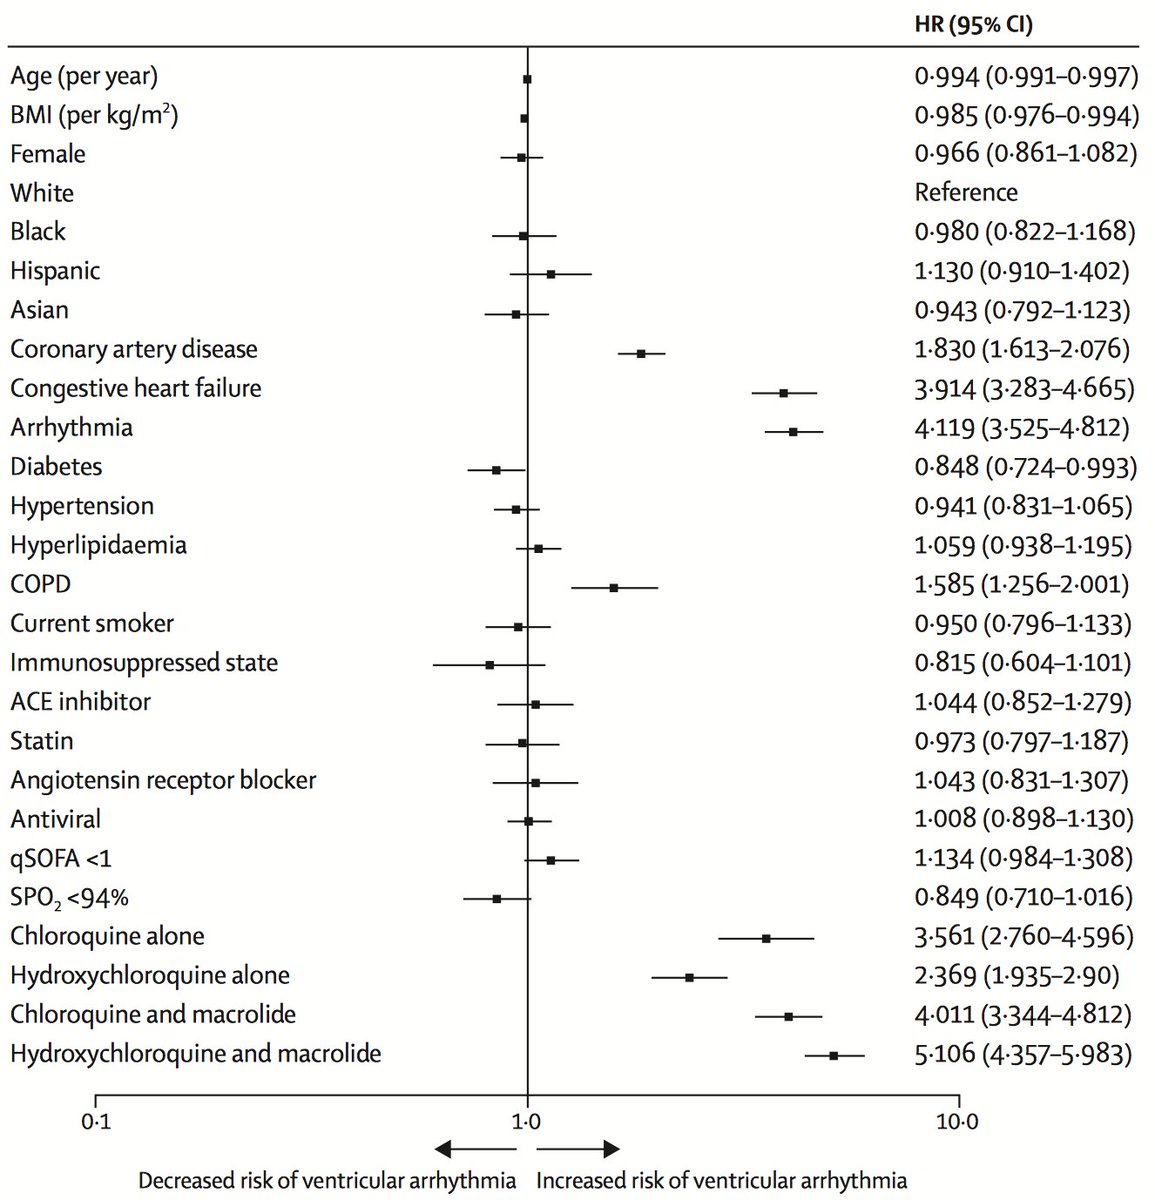 Huge observational study that just came out in  @lancet on 96,032  #COVID19 patients including 14,888 treated with  #hydroxychroloquine HCQ or CQ ± AZ showing no benefit against  #COVID19 but significant increase of serious adverse cardiac effects (QTc)  https://www.thelancet.com/lancet/article/s0140673620311806?utm_campaign=tlcoronavirus20&utm_source=twitter&utm_medium=social